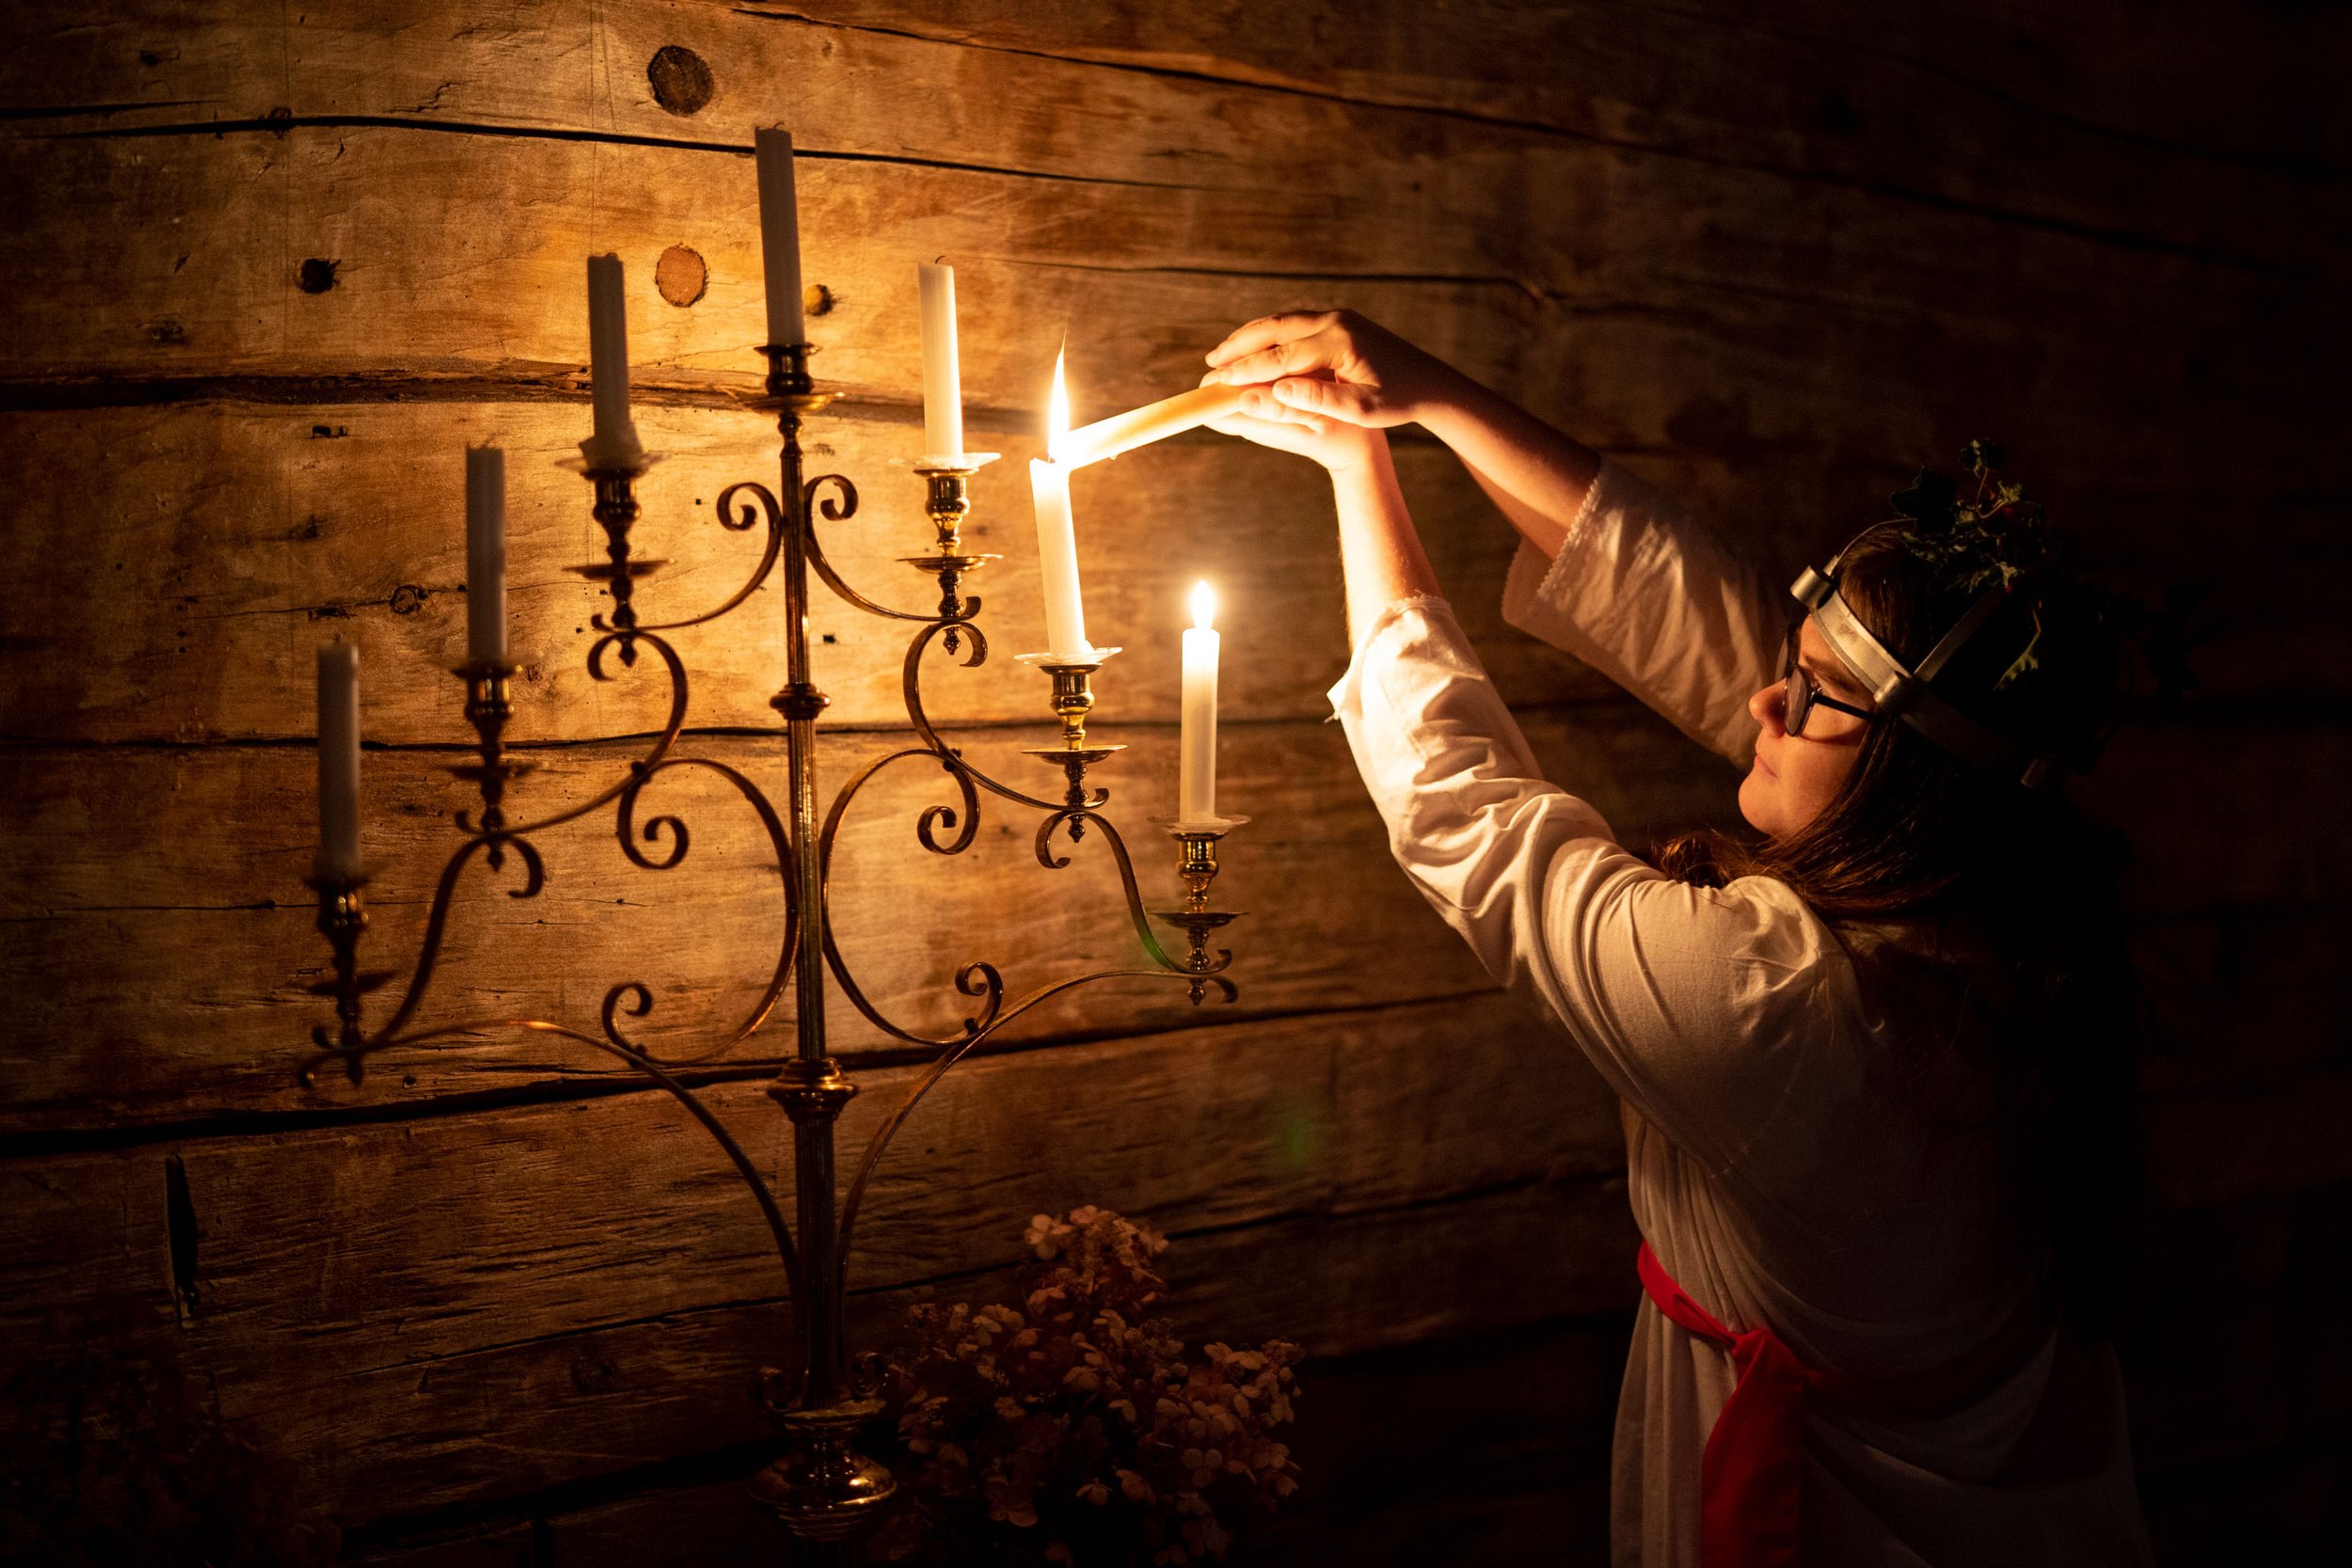  Becka Newcomb, 16, lights a candle in the old church at the Gammelgården Museum for the Saint Lucia Day celebration Dec. 11, 2022 in Scandia, Minn. Every year, a high school girl is picked to play Saint Lucia to honor the Swedish tradition of bringi